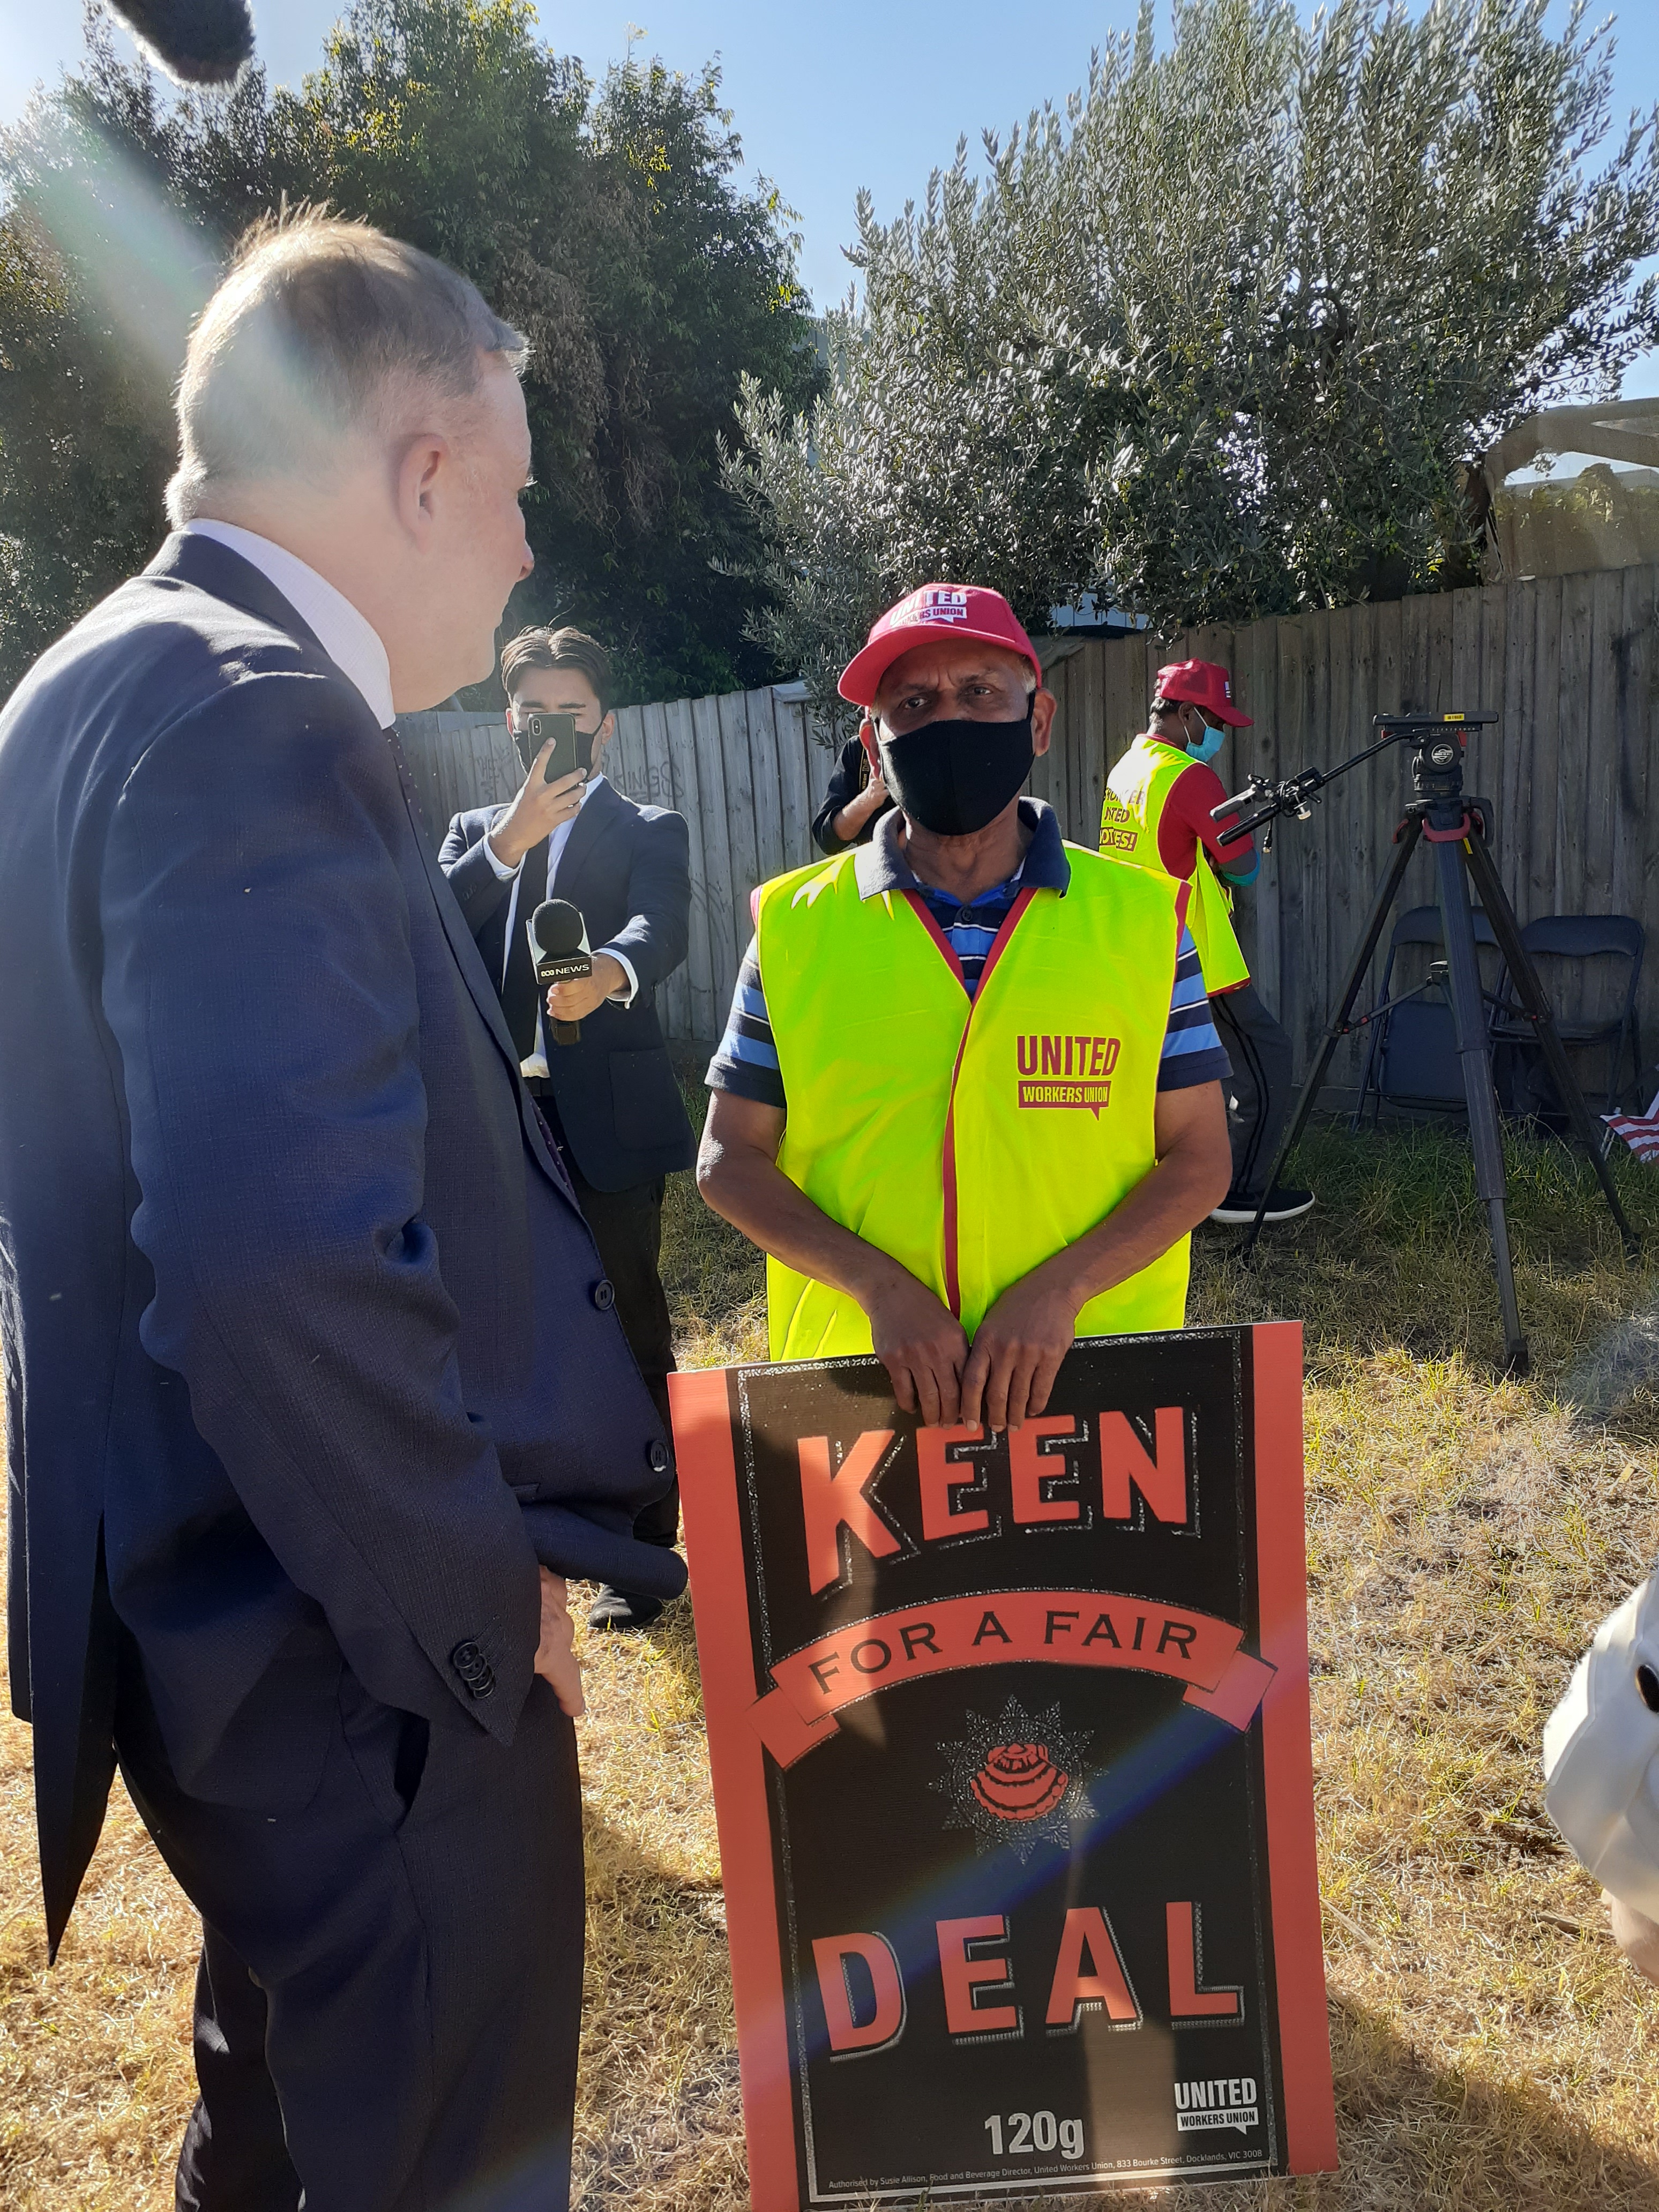 UWU member from McCormick's Picket with Anthony Albanese